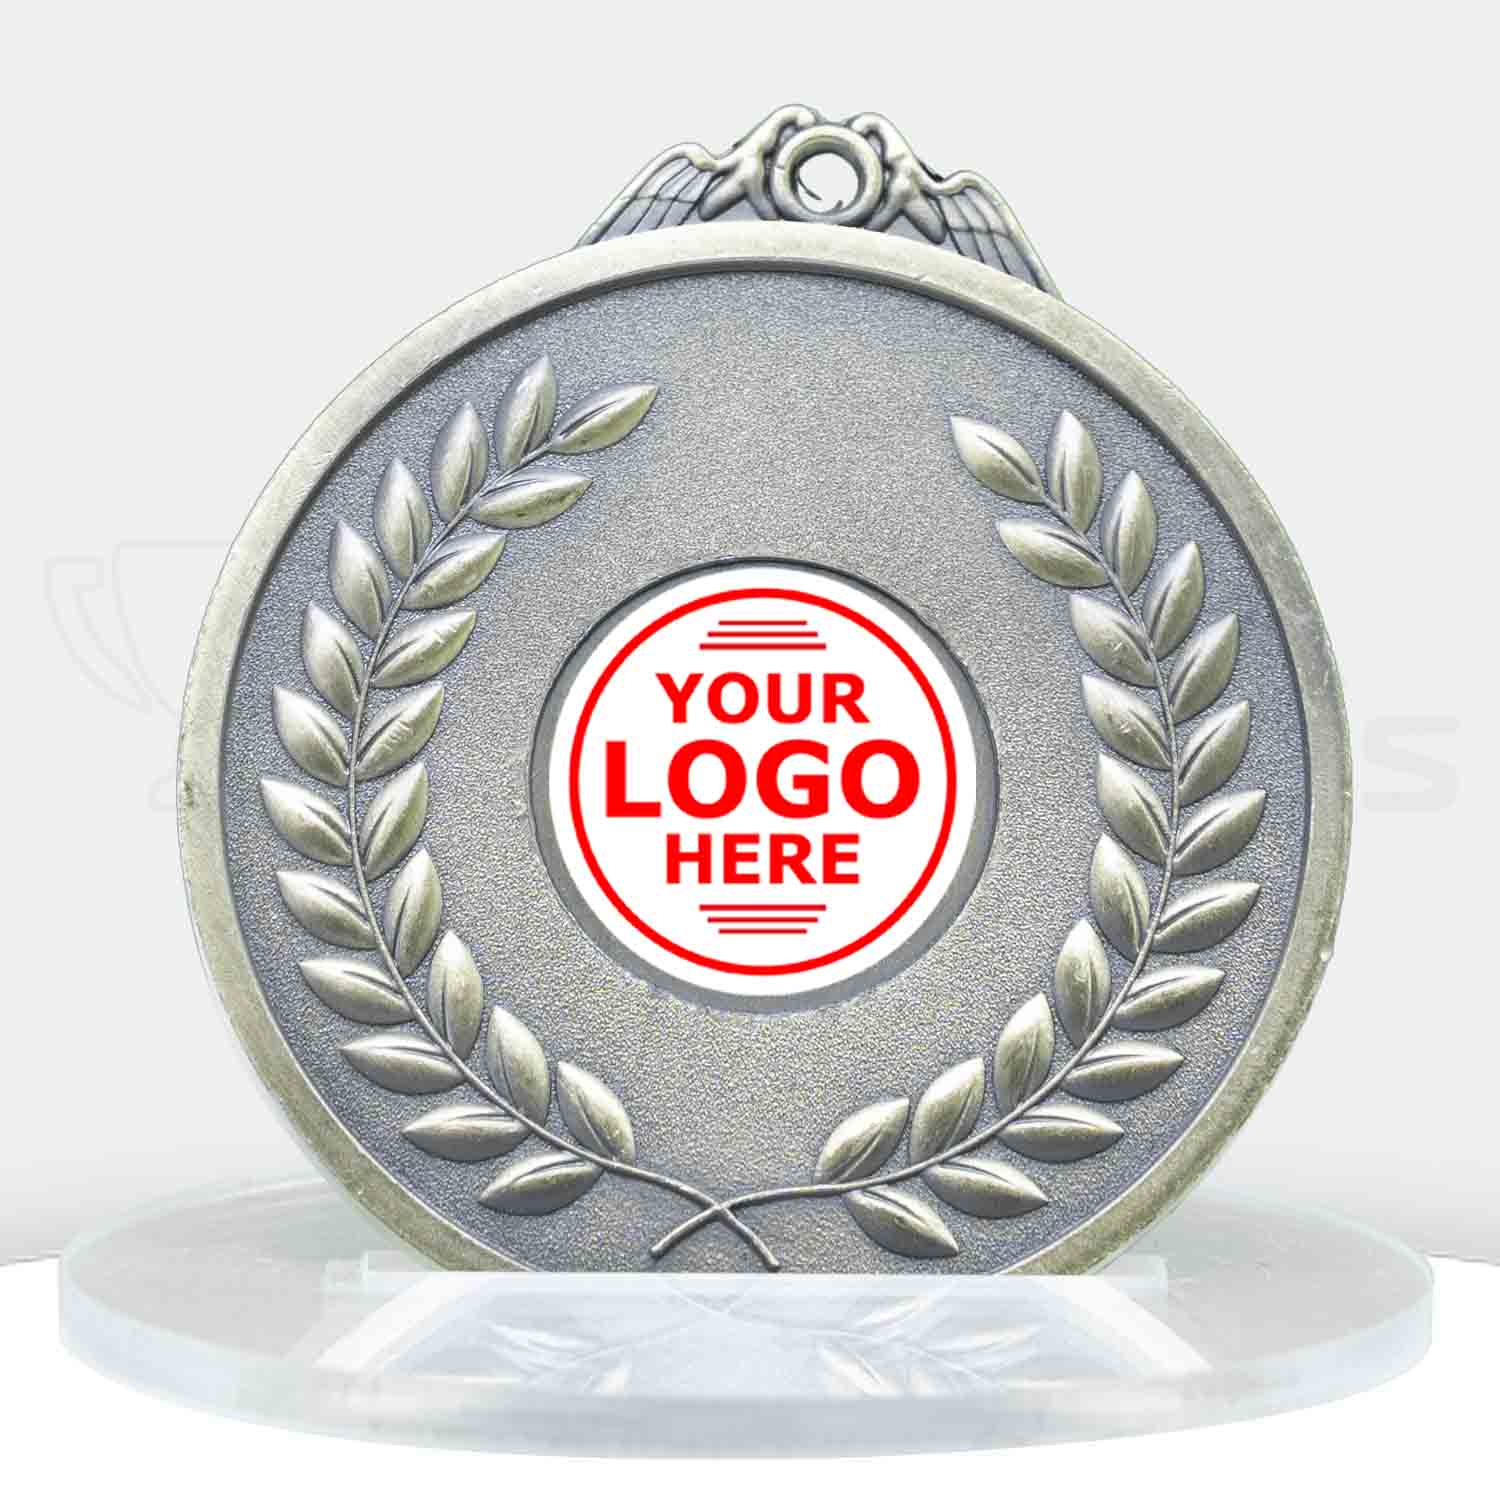 supreme-medal-generic-25mm-insert-gold-1079g-front-with-logo